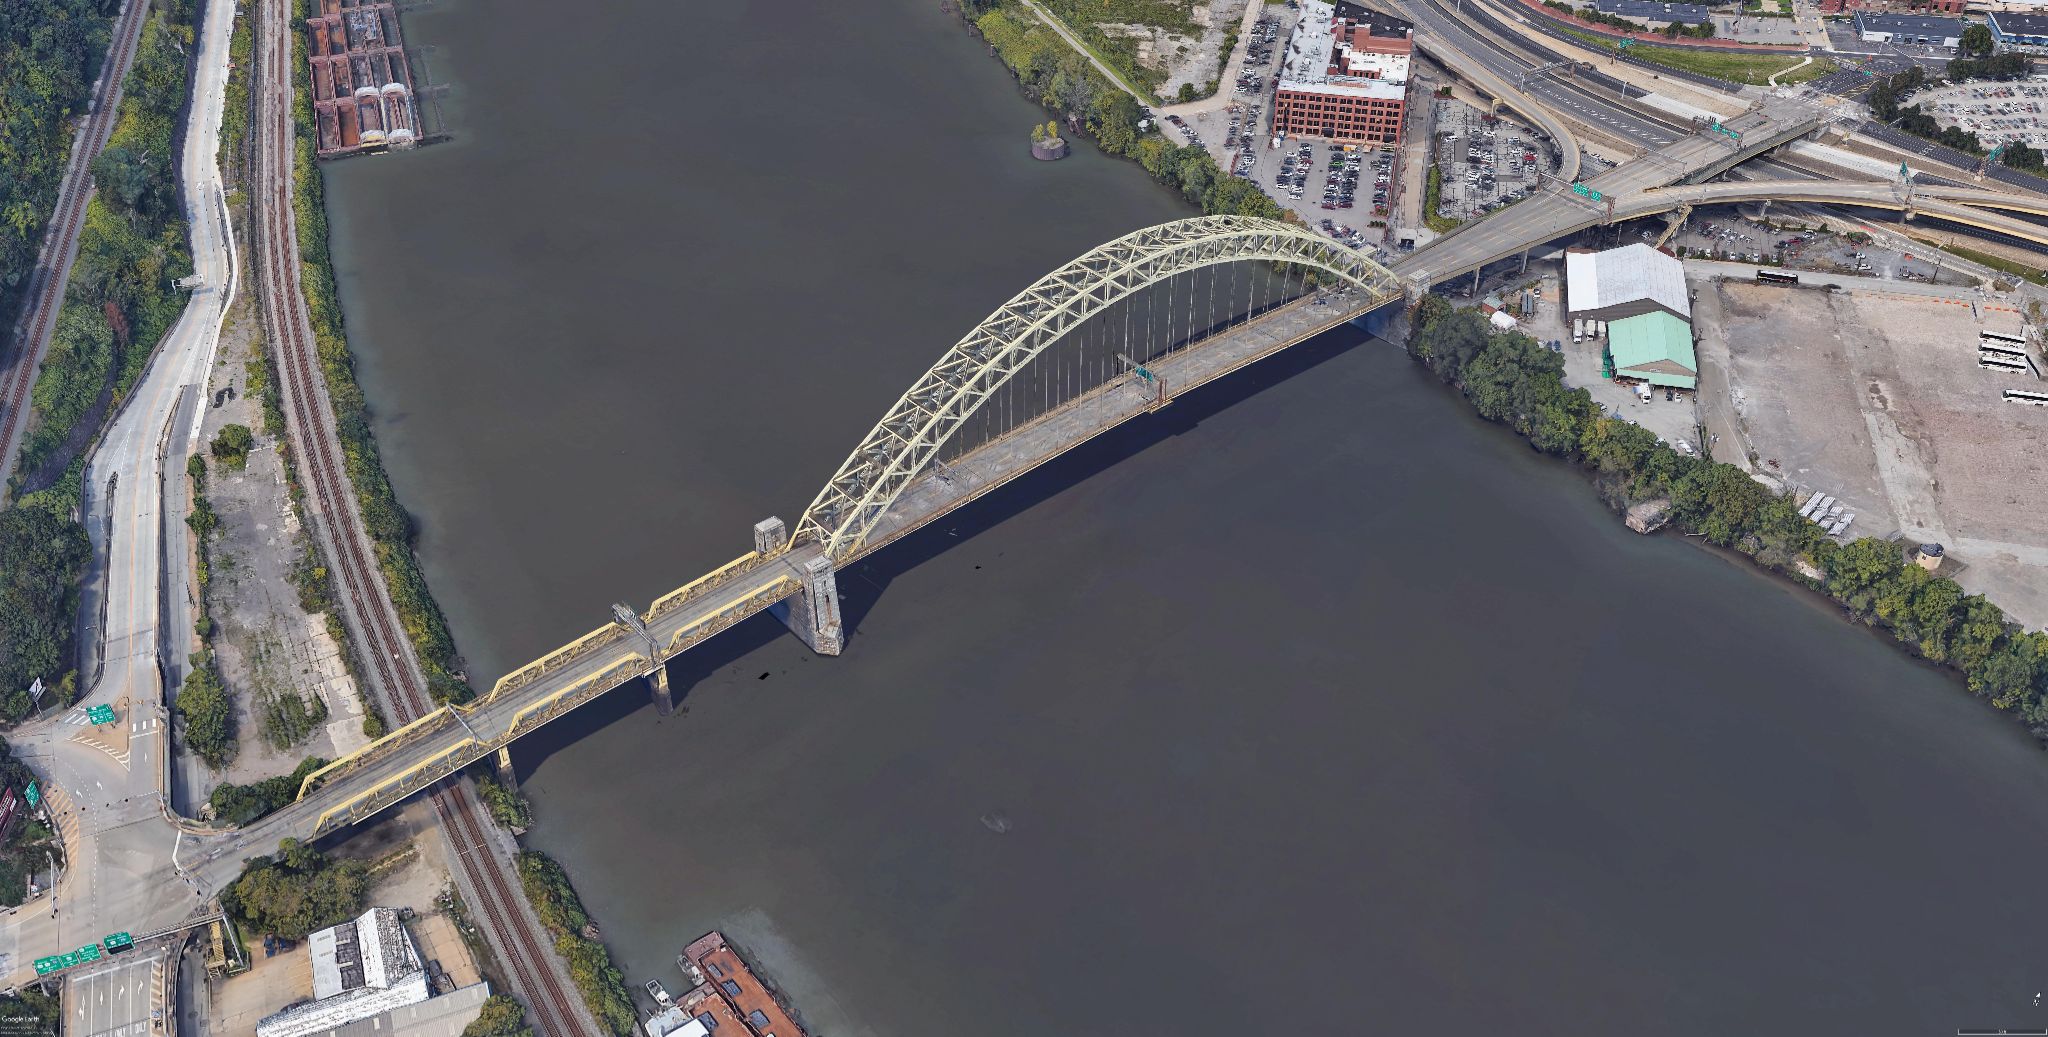 Aerial view of the West End Bridge